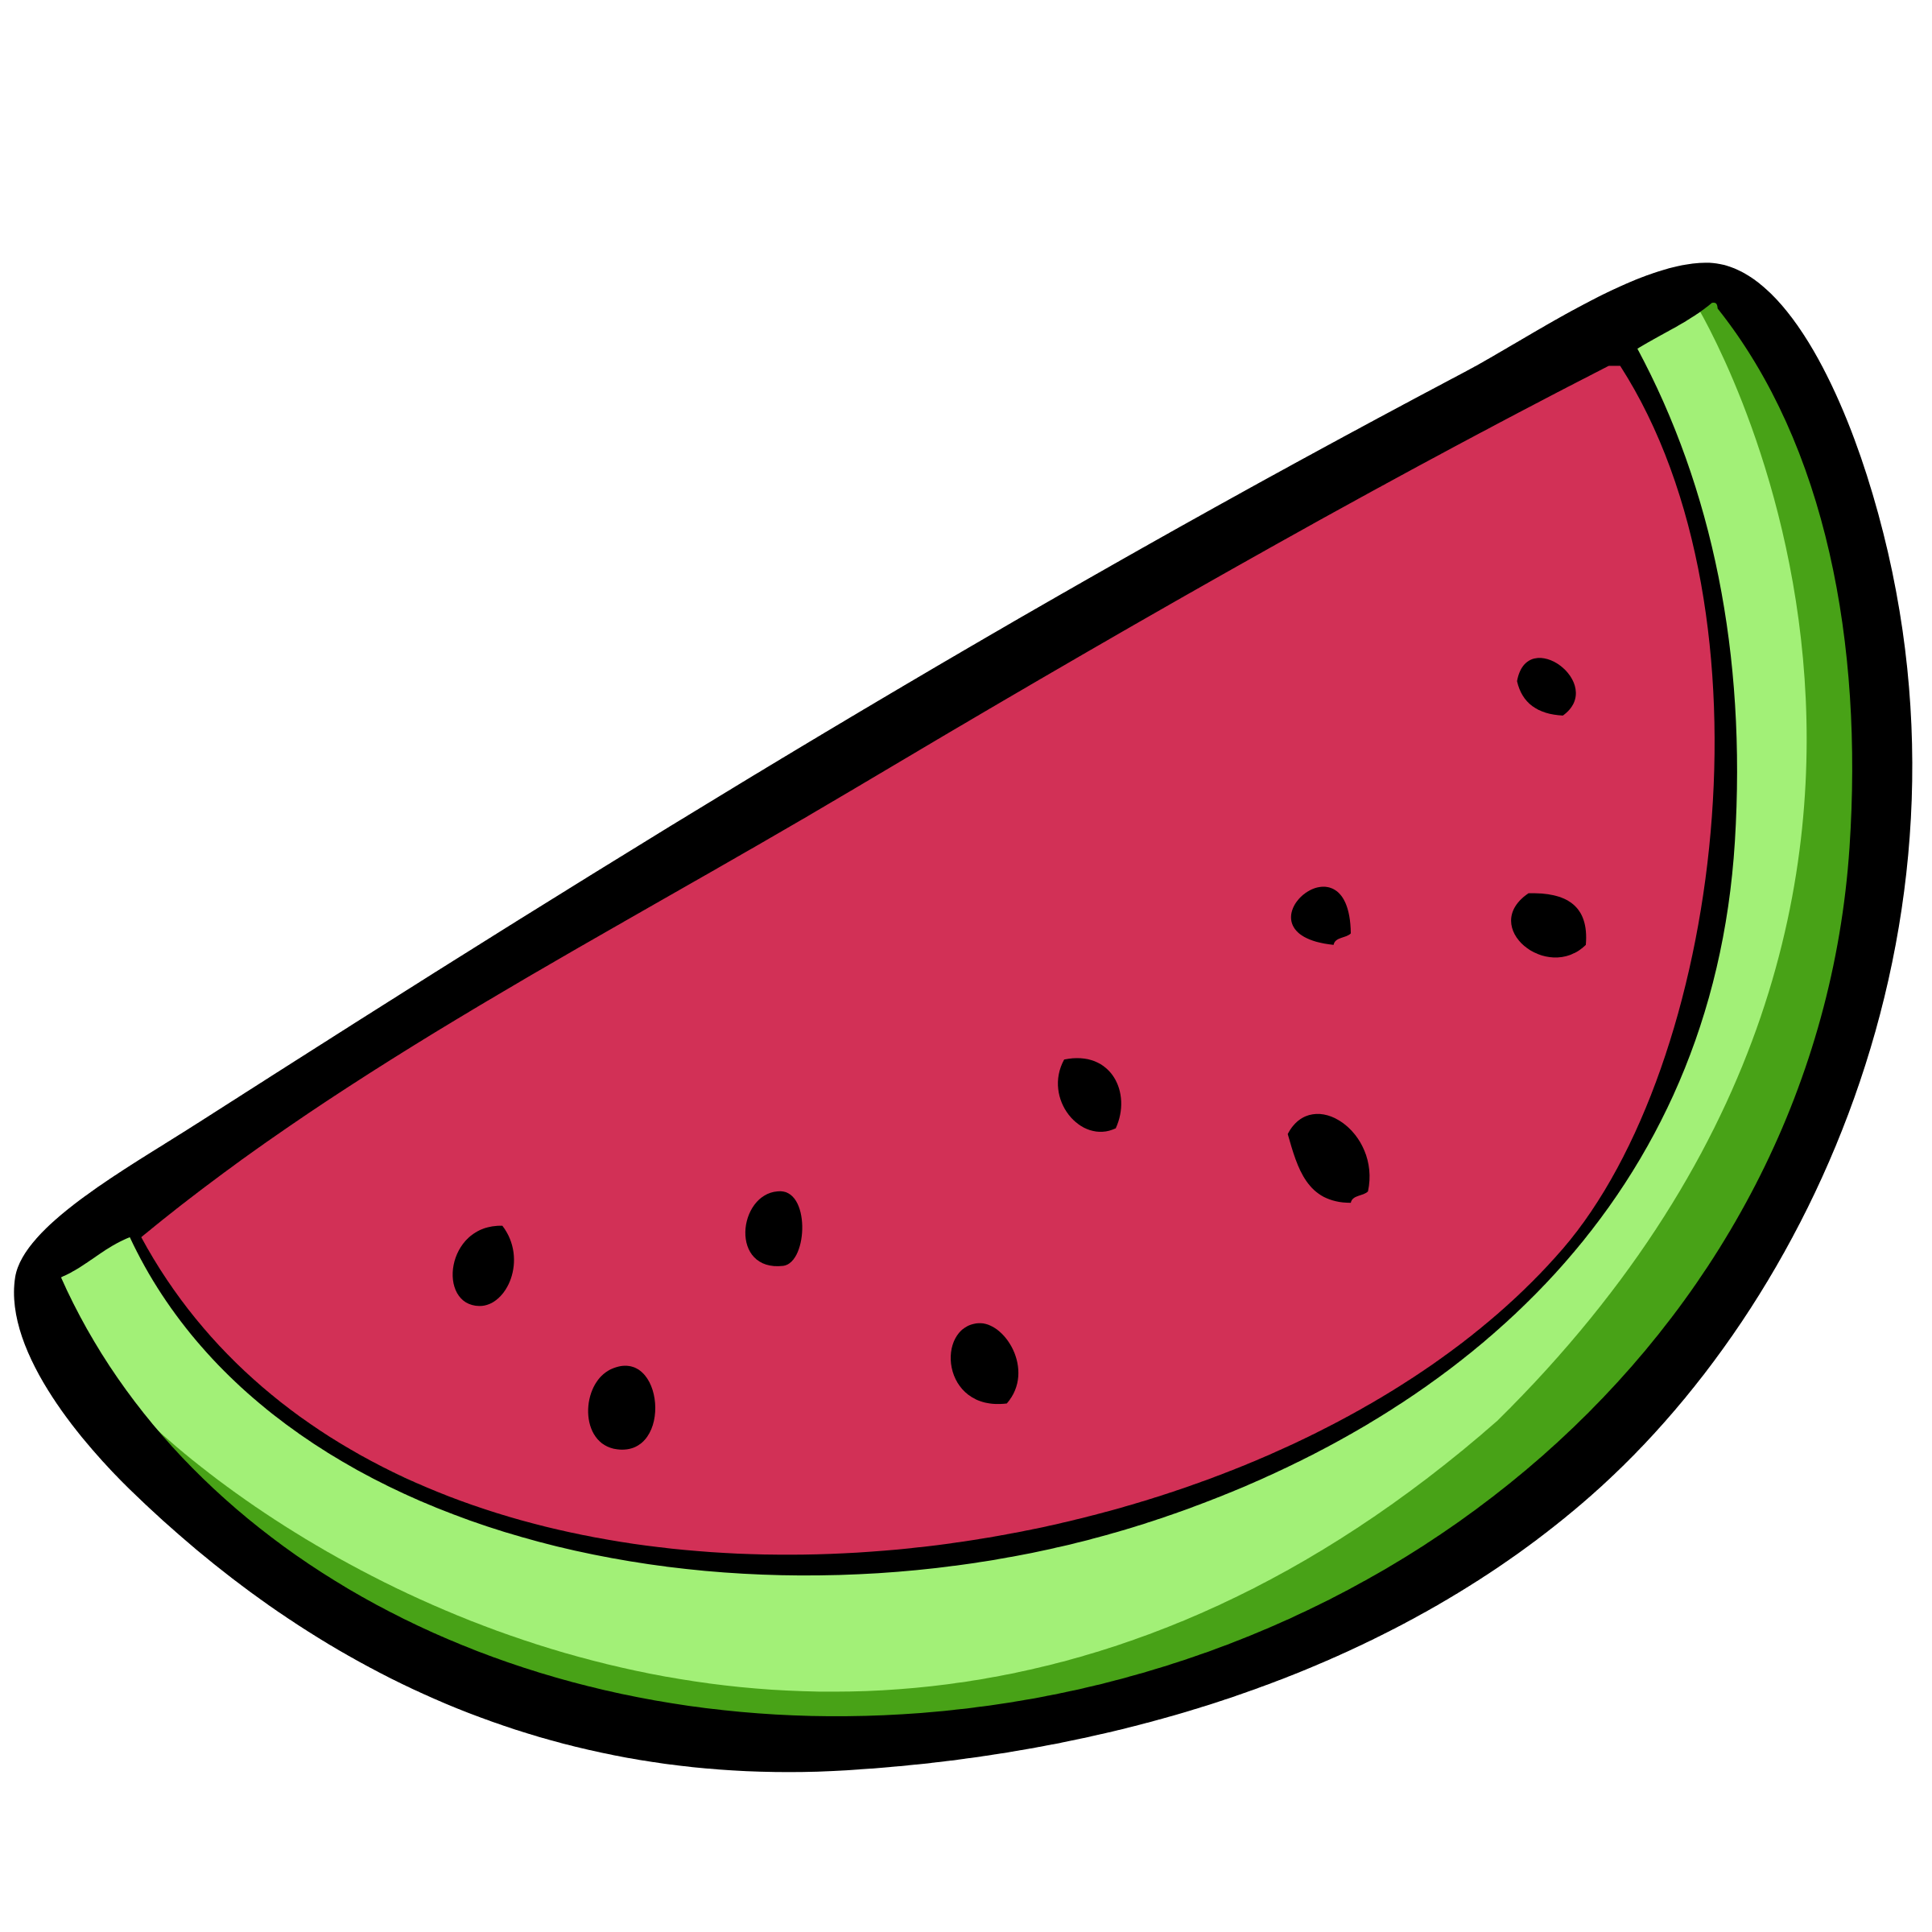 Clipart - Watermelon - Free Clipart Images